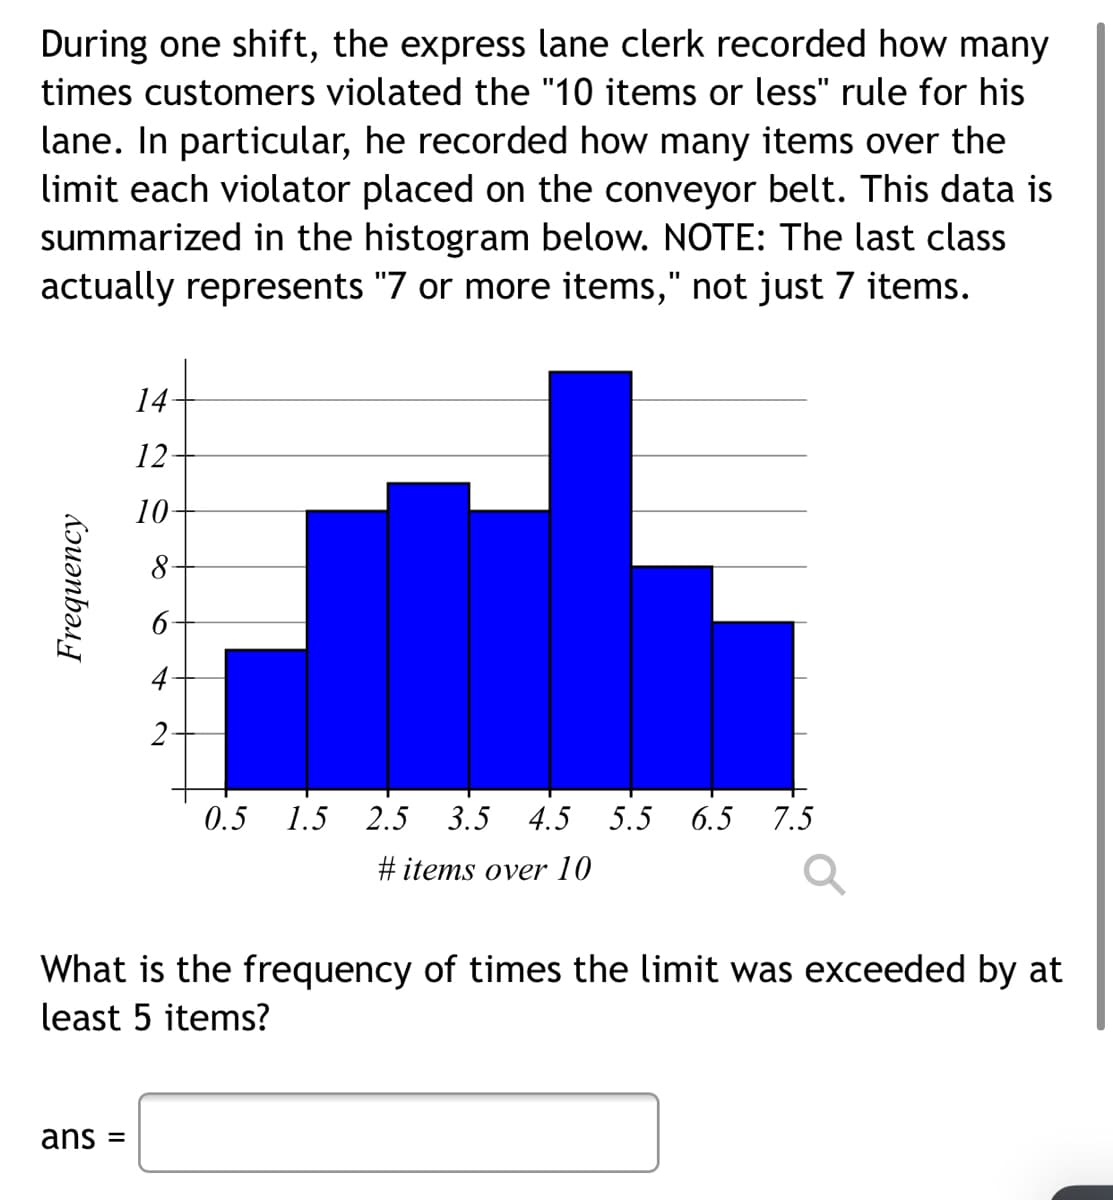 During one shift, the express lane clerk recorded how many
times customers violated the "10 items or less" rule for his
lane. In particular, he recorded how many items over the
limit each violator placed on the conveyor belt. This data is
summarized in the histogram below. NOTE: The last class
actually represents "7 or more items," not just 7 items.
14
12
10
2-
0.5 1.5 2.5 3.5 4.5 5.5 6.5 7.5
#items over 10
What is the frequency of times the limit was exceeded by at
least 5 items?
ans =
Frequency
8
+